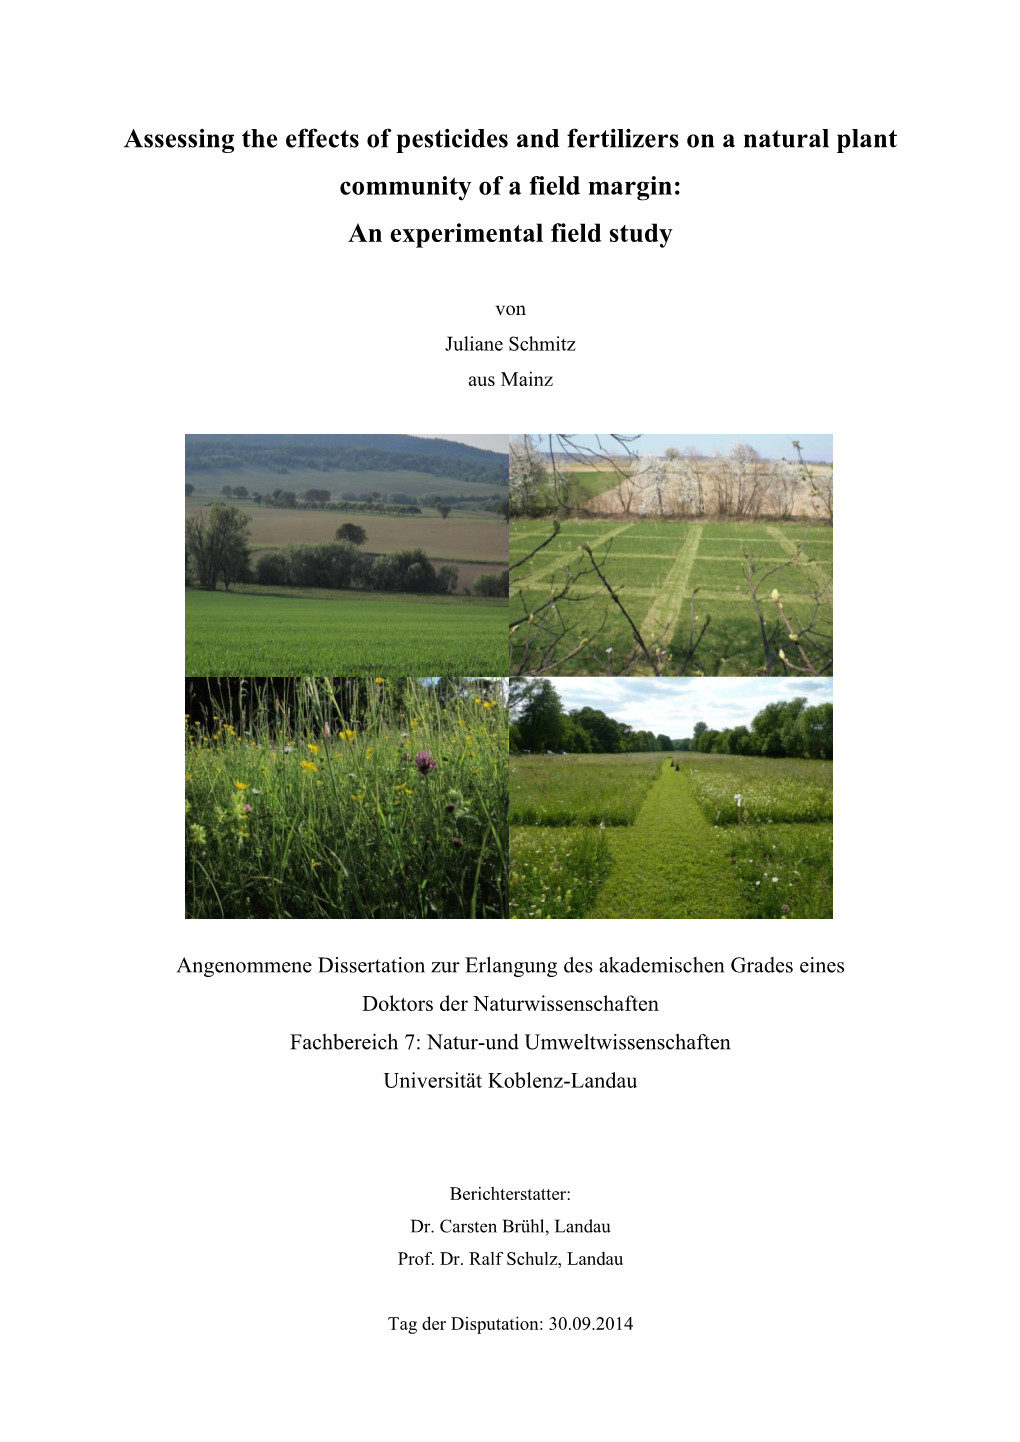 Assessing the Effects of Pesticides and Fertilizers on a Natural Plant Community of a Field Margin: an Experimental Field Study